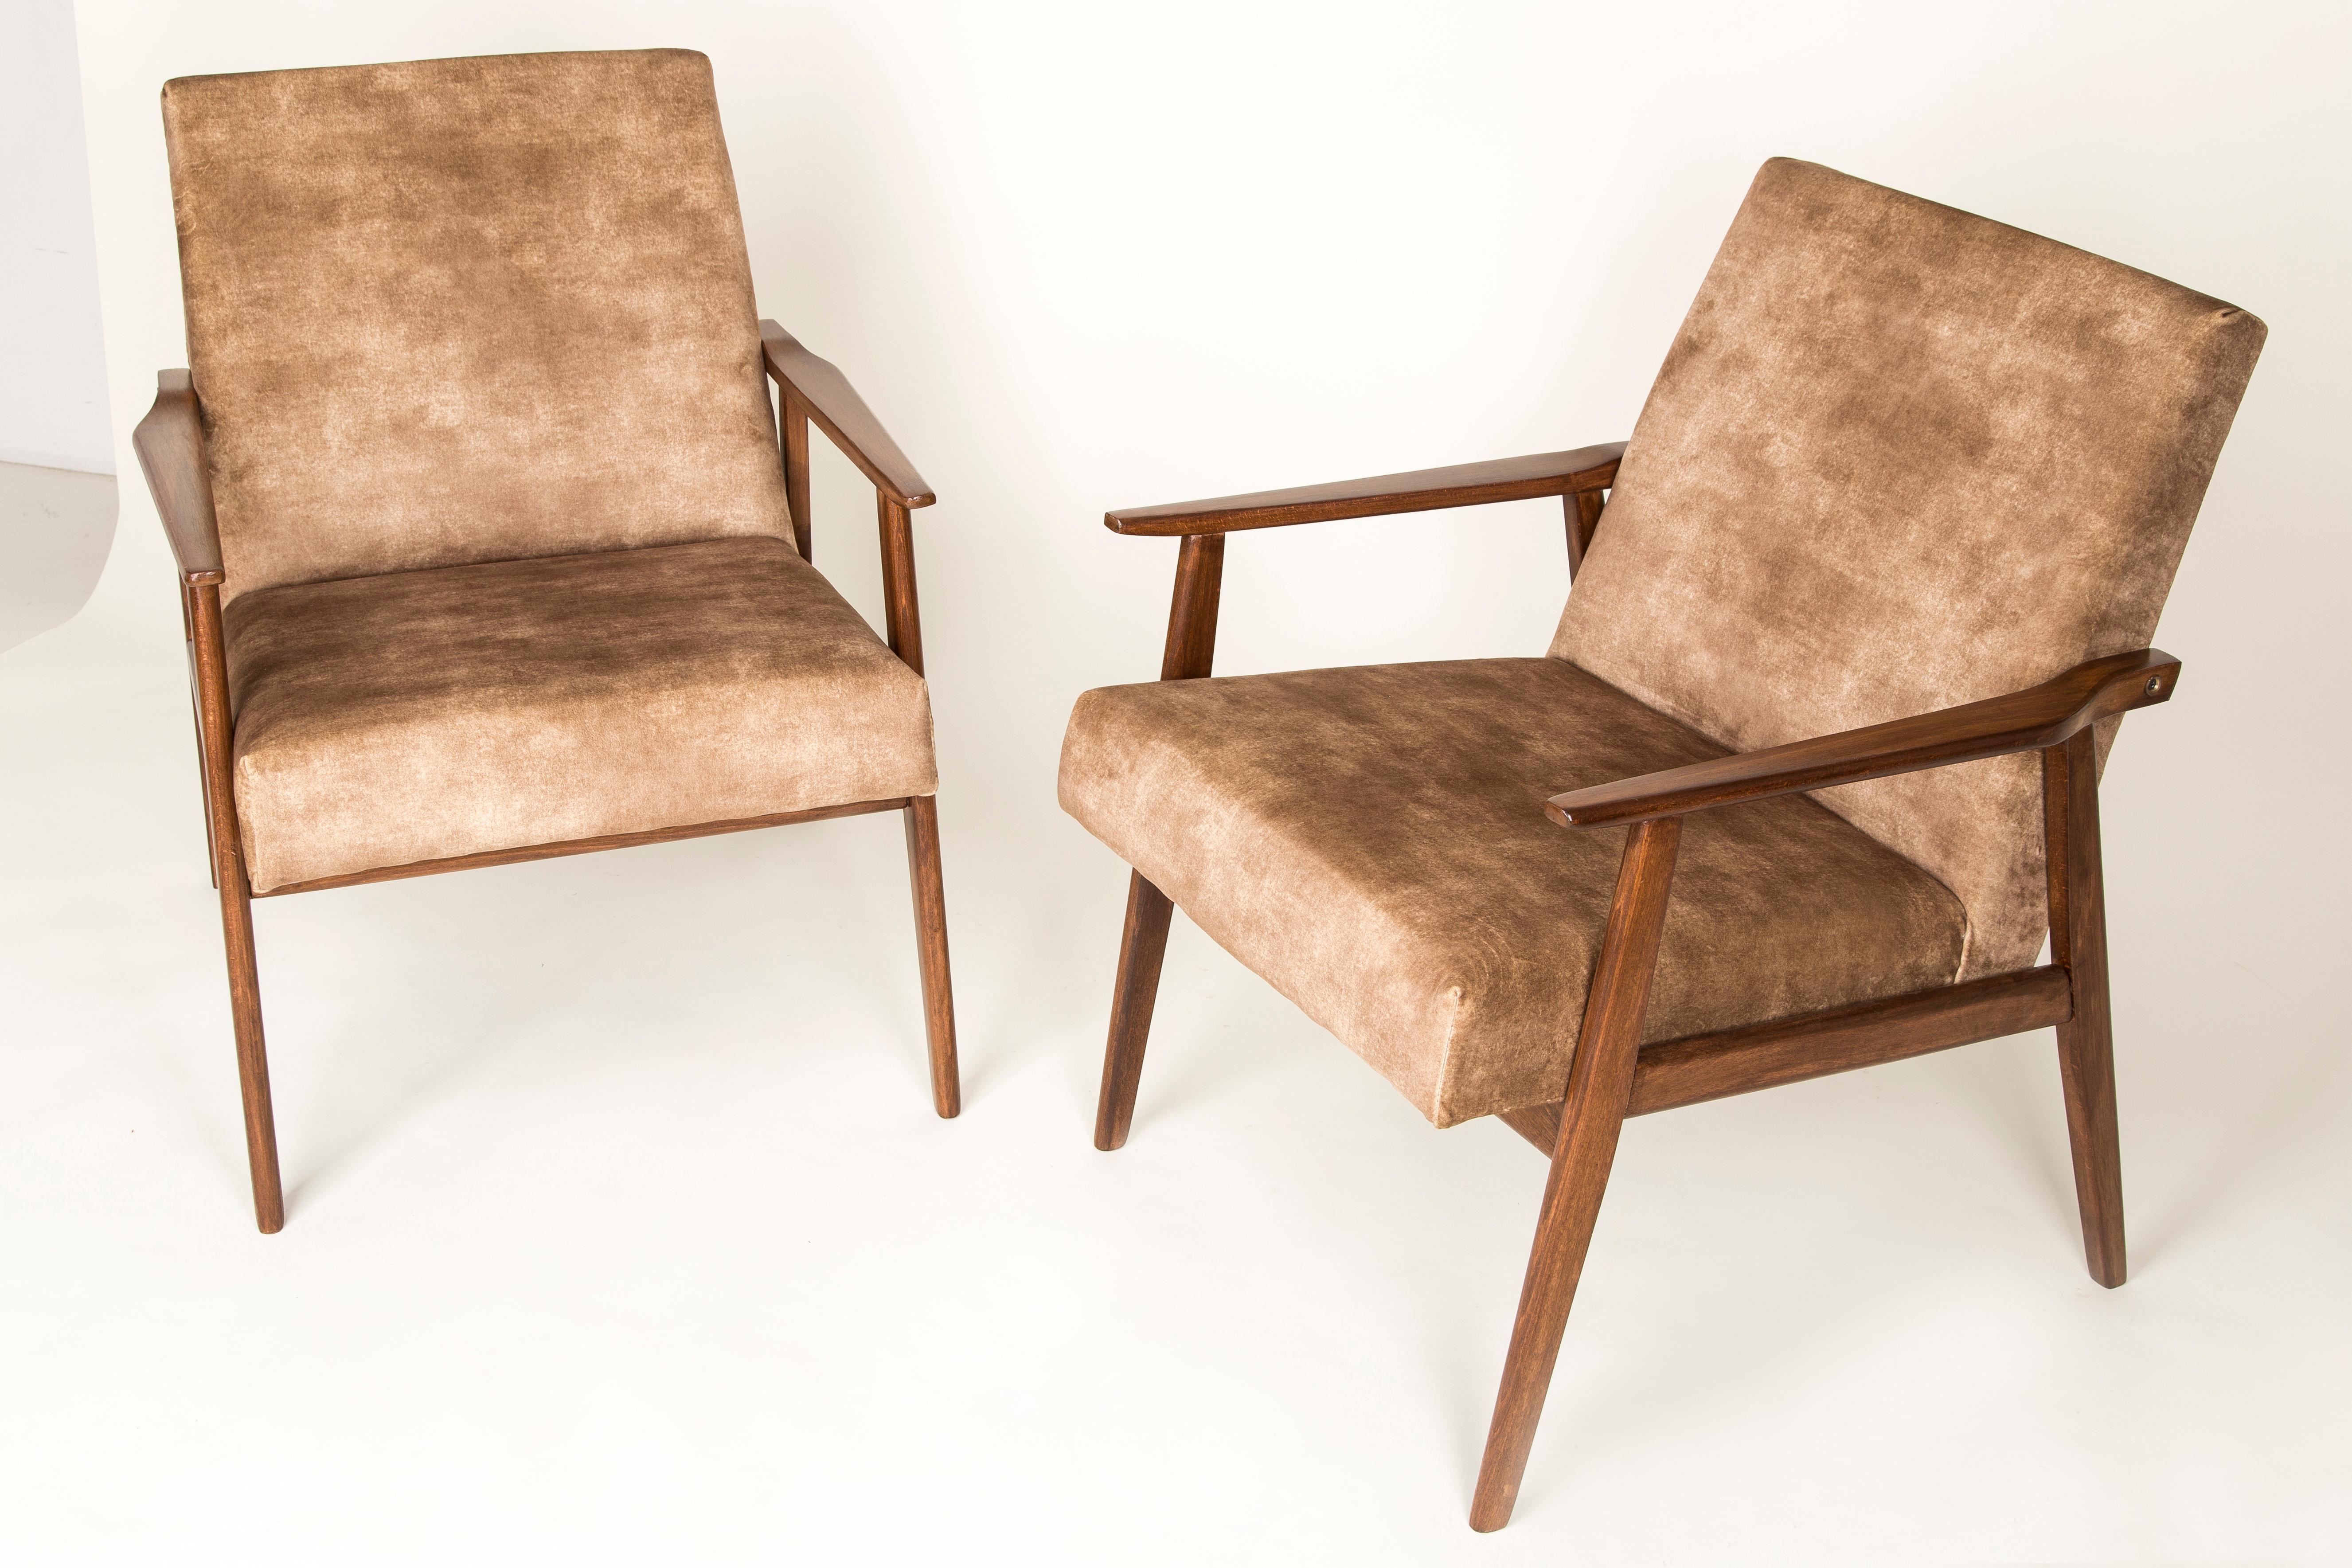 A beautiful, restored armchairs designed by Henryk Lis. This is a limited edition and a part of 